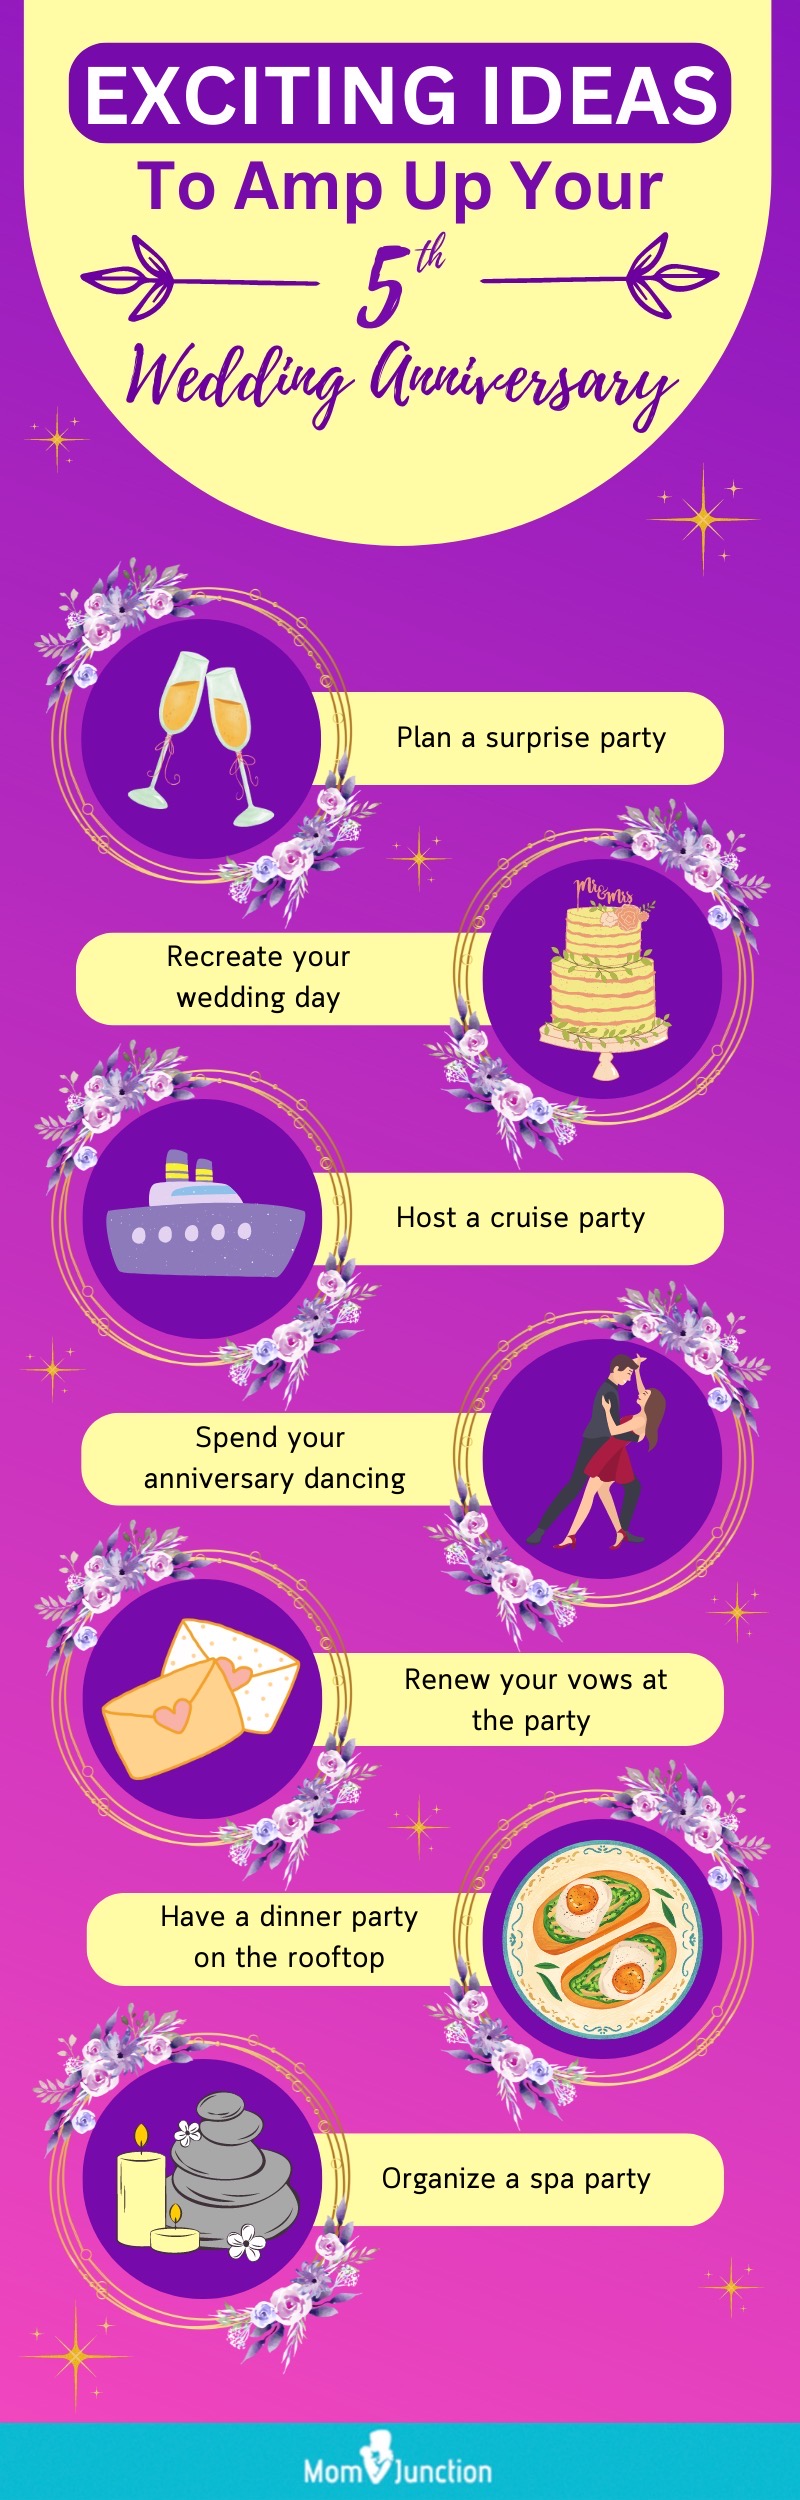 exiting ideas to amp up your wedding anniversary (infographic)